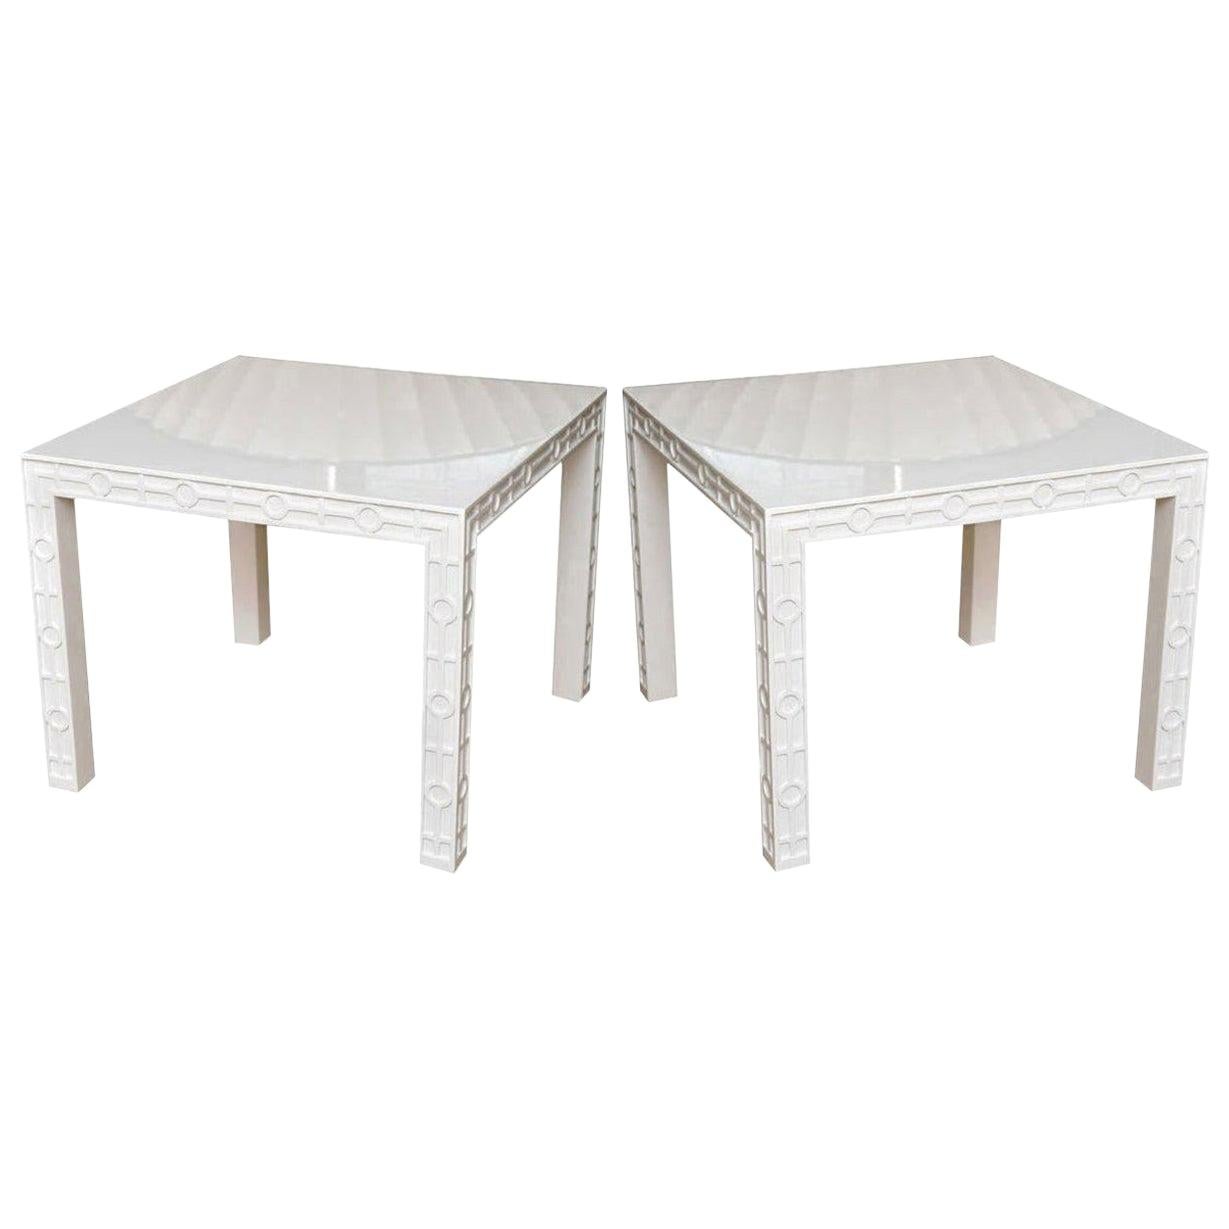 Pair of White Lacquered Wood Graphic and Sculptural Side or End Tables Vintage